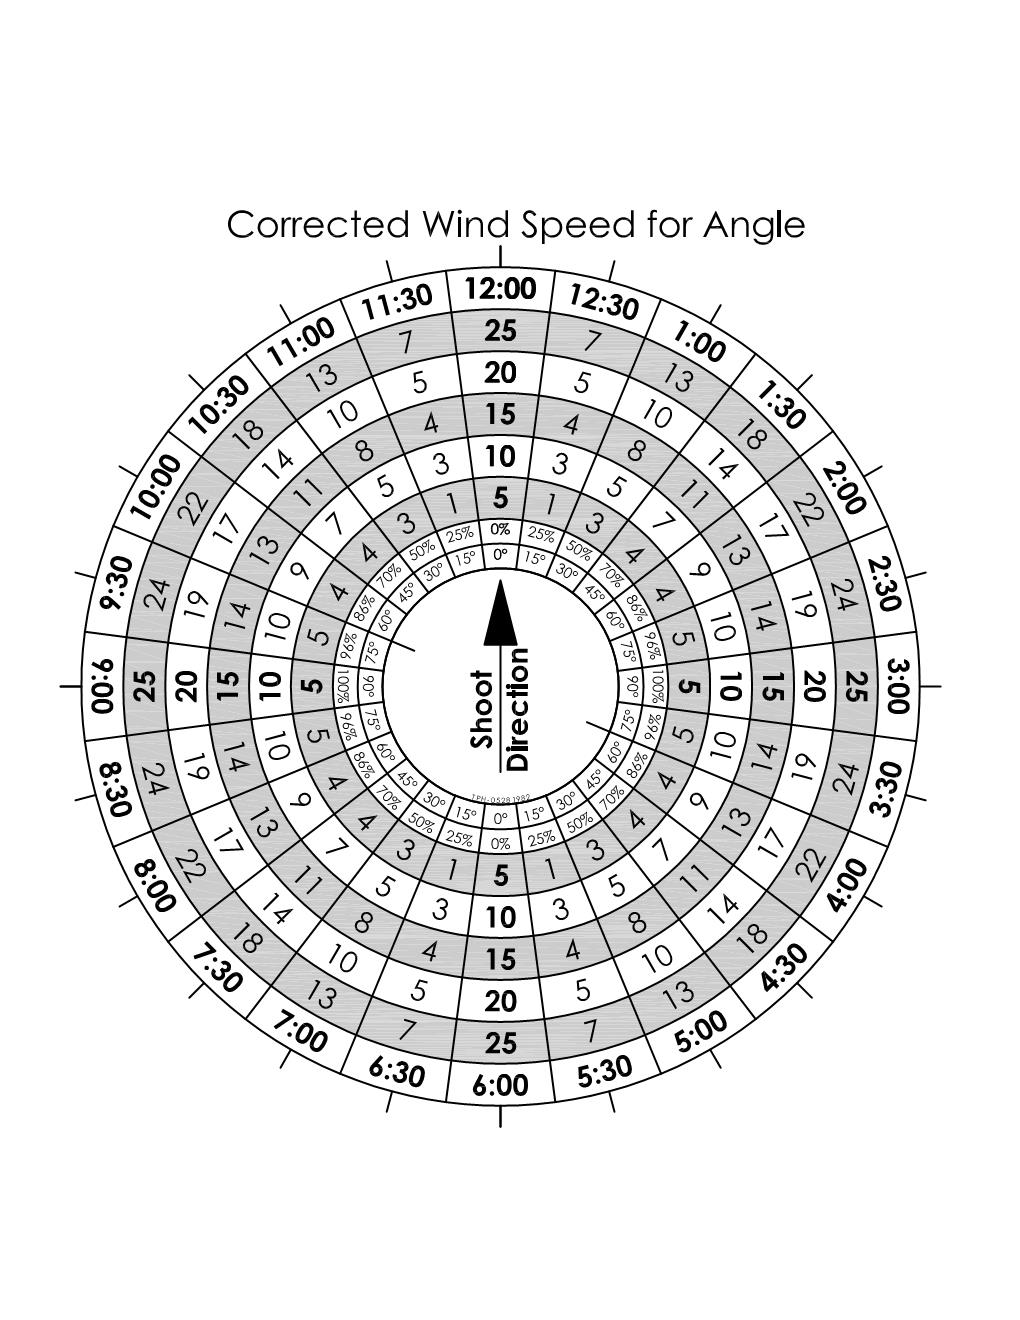 Wind Rose - Corrected wind speed for Angle.jpg